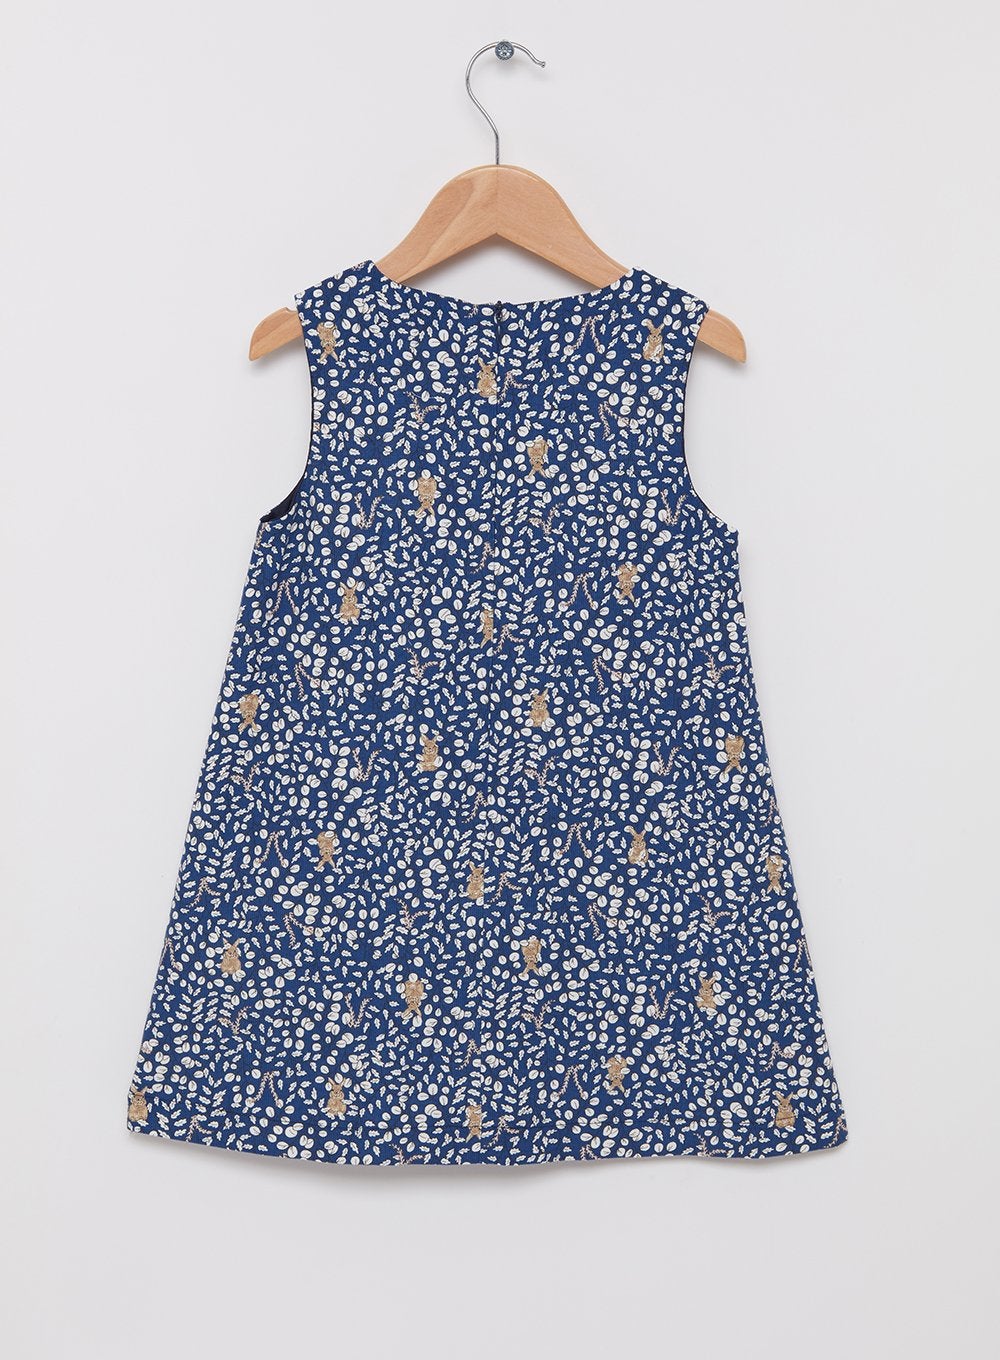 Confiture Dress Emma Cord Pinafore - Trotters Childrenswear